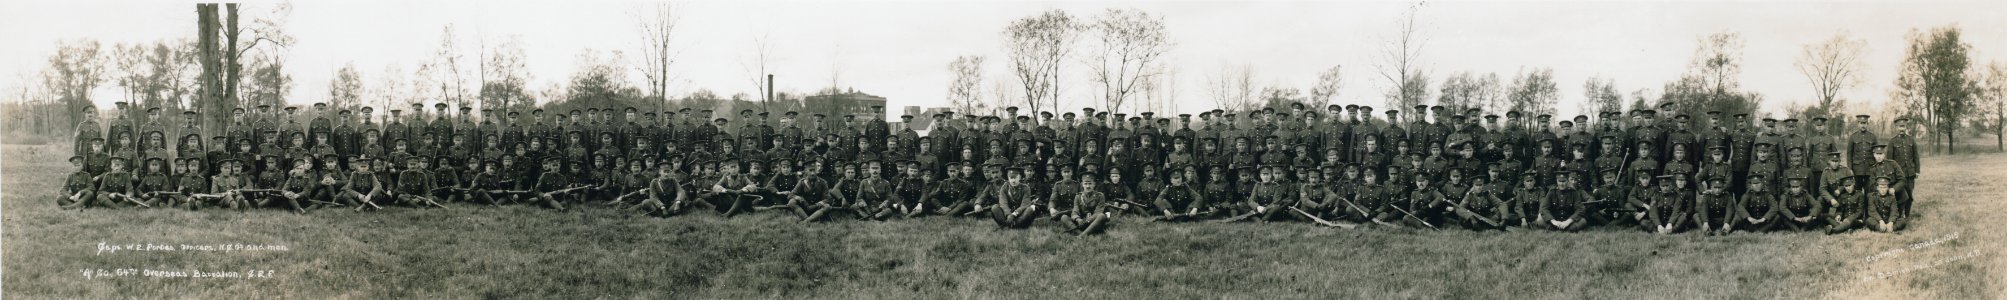 Capt. W.E. Forbes, officers, NCO's and men, A Co., 64 Overseas Battalion, CEF (HS85-10-31304) photo